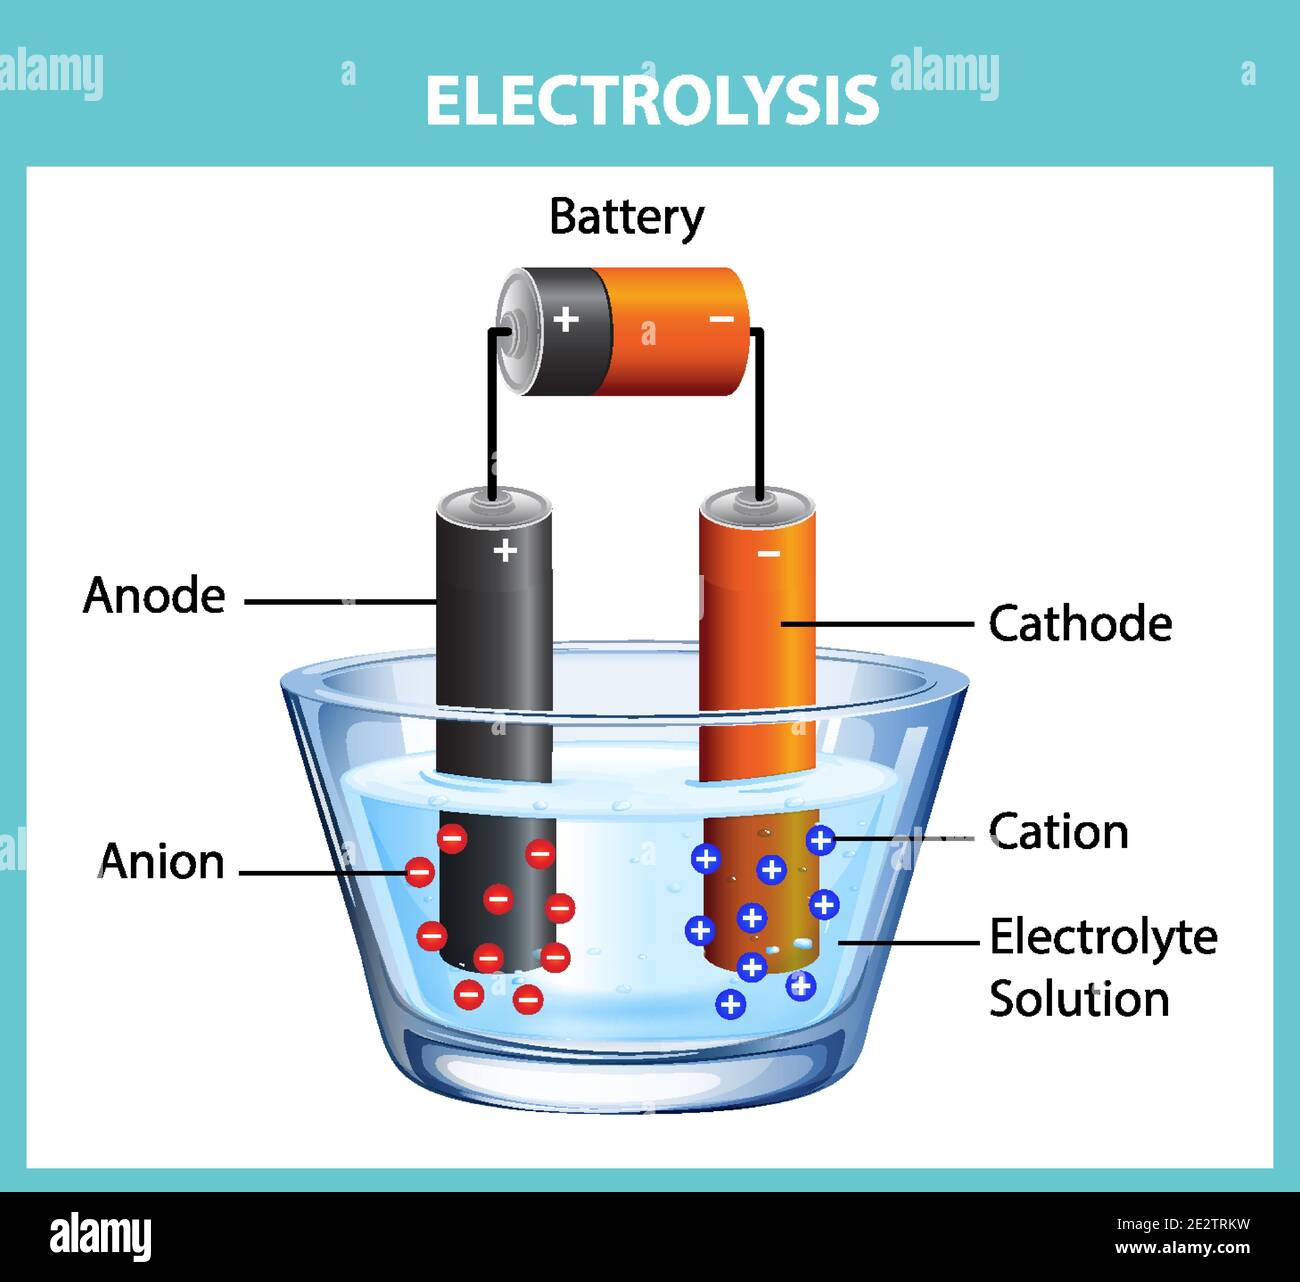 Electrolysis diagram experiment for education illustration Stock Vector ...